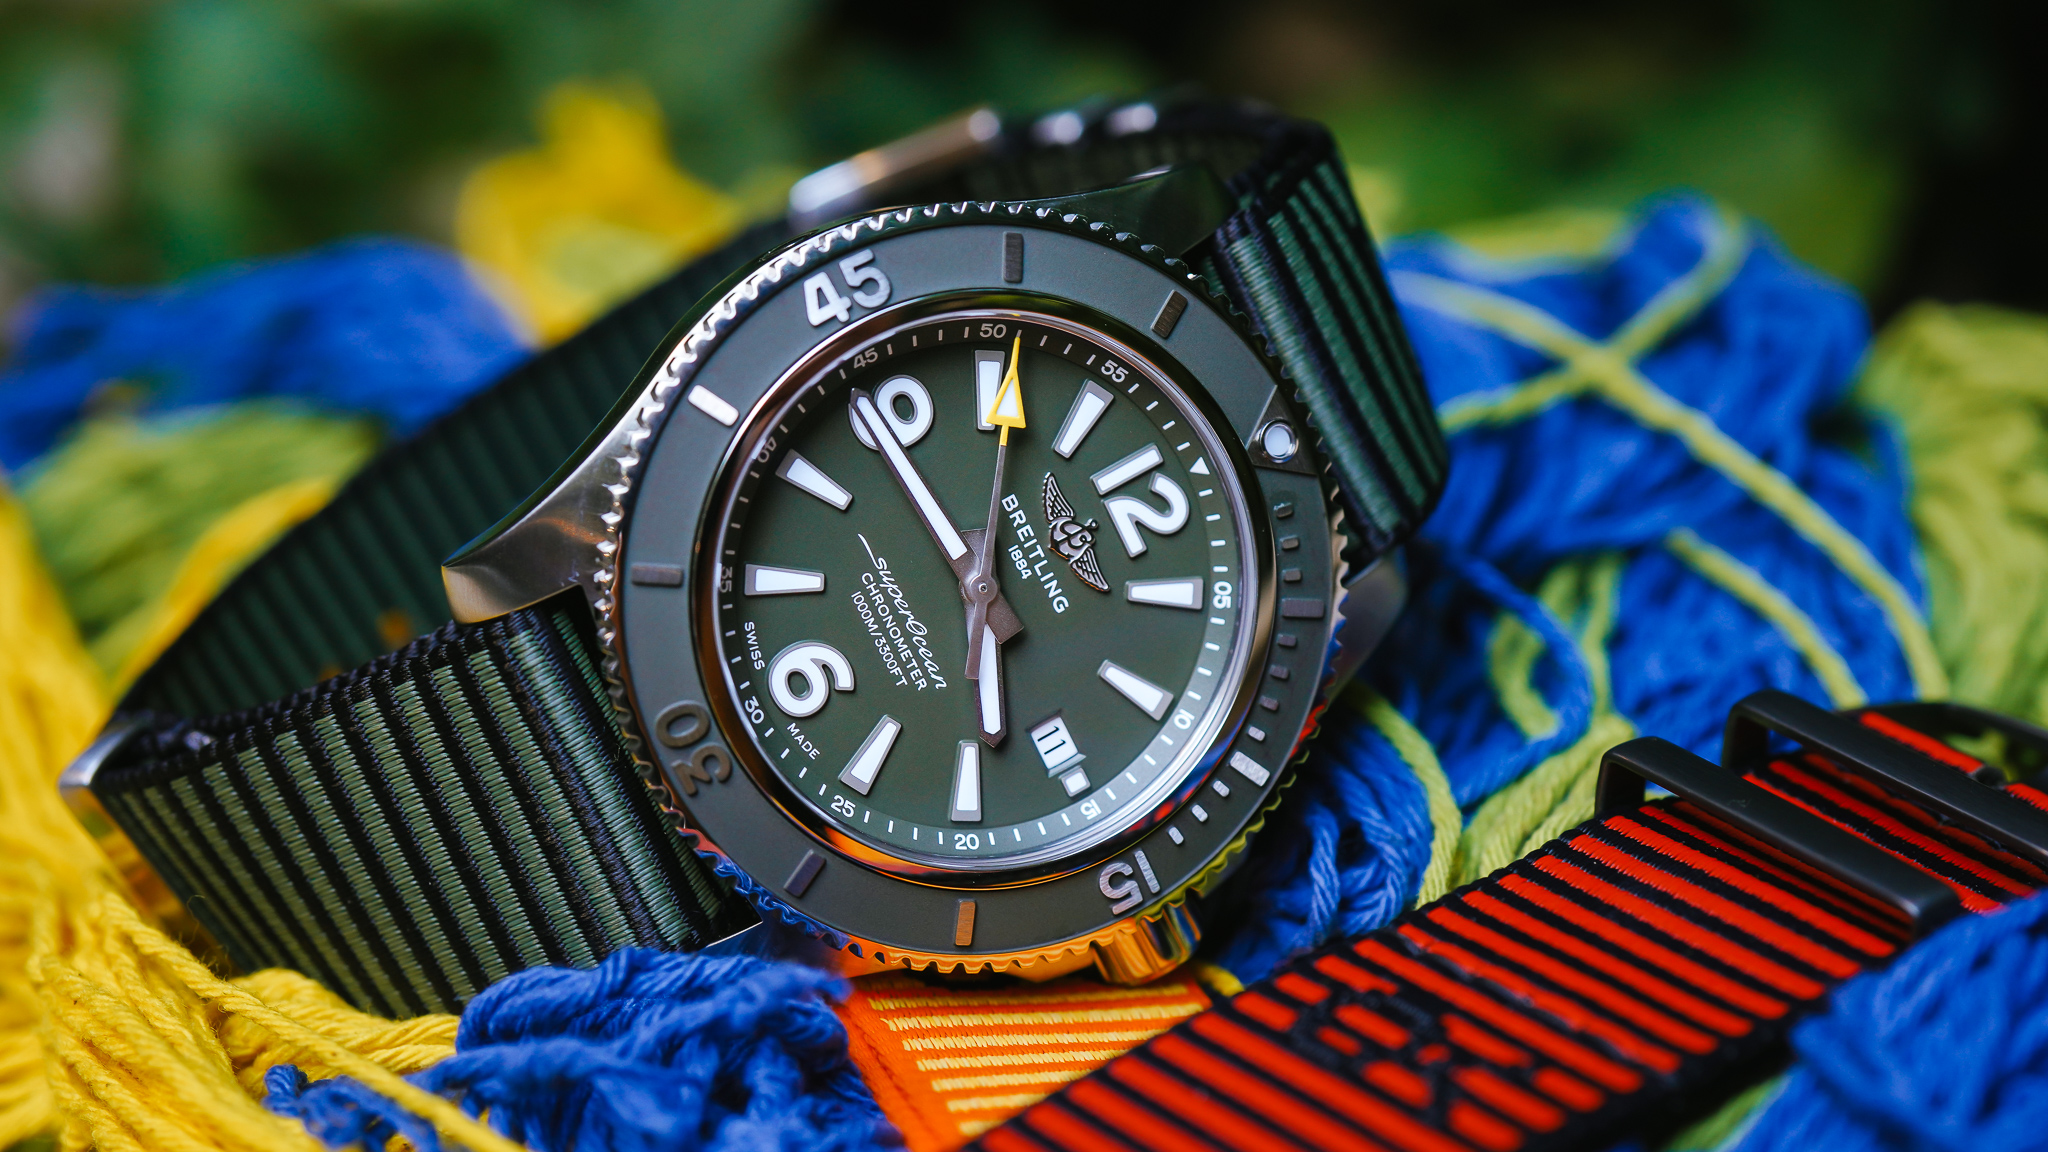 How the Breitling Superocean Outerknown 